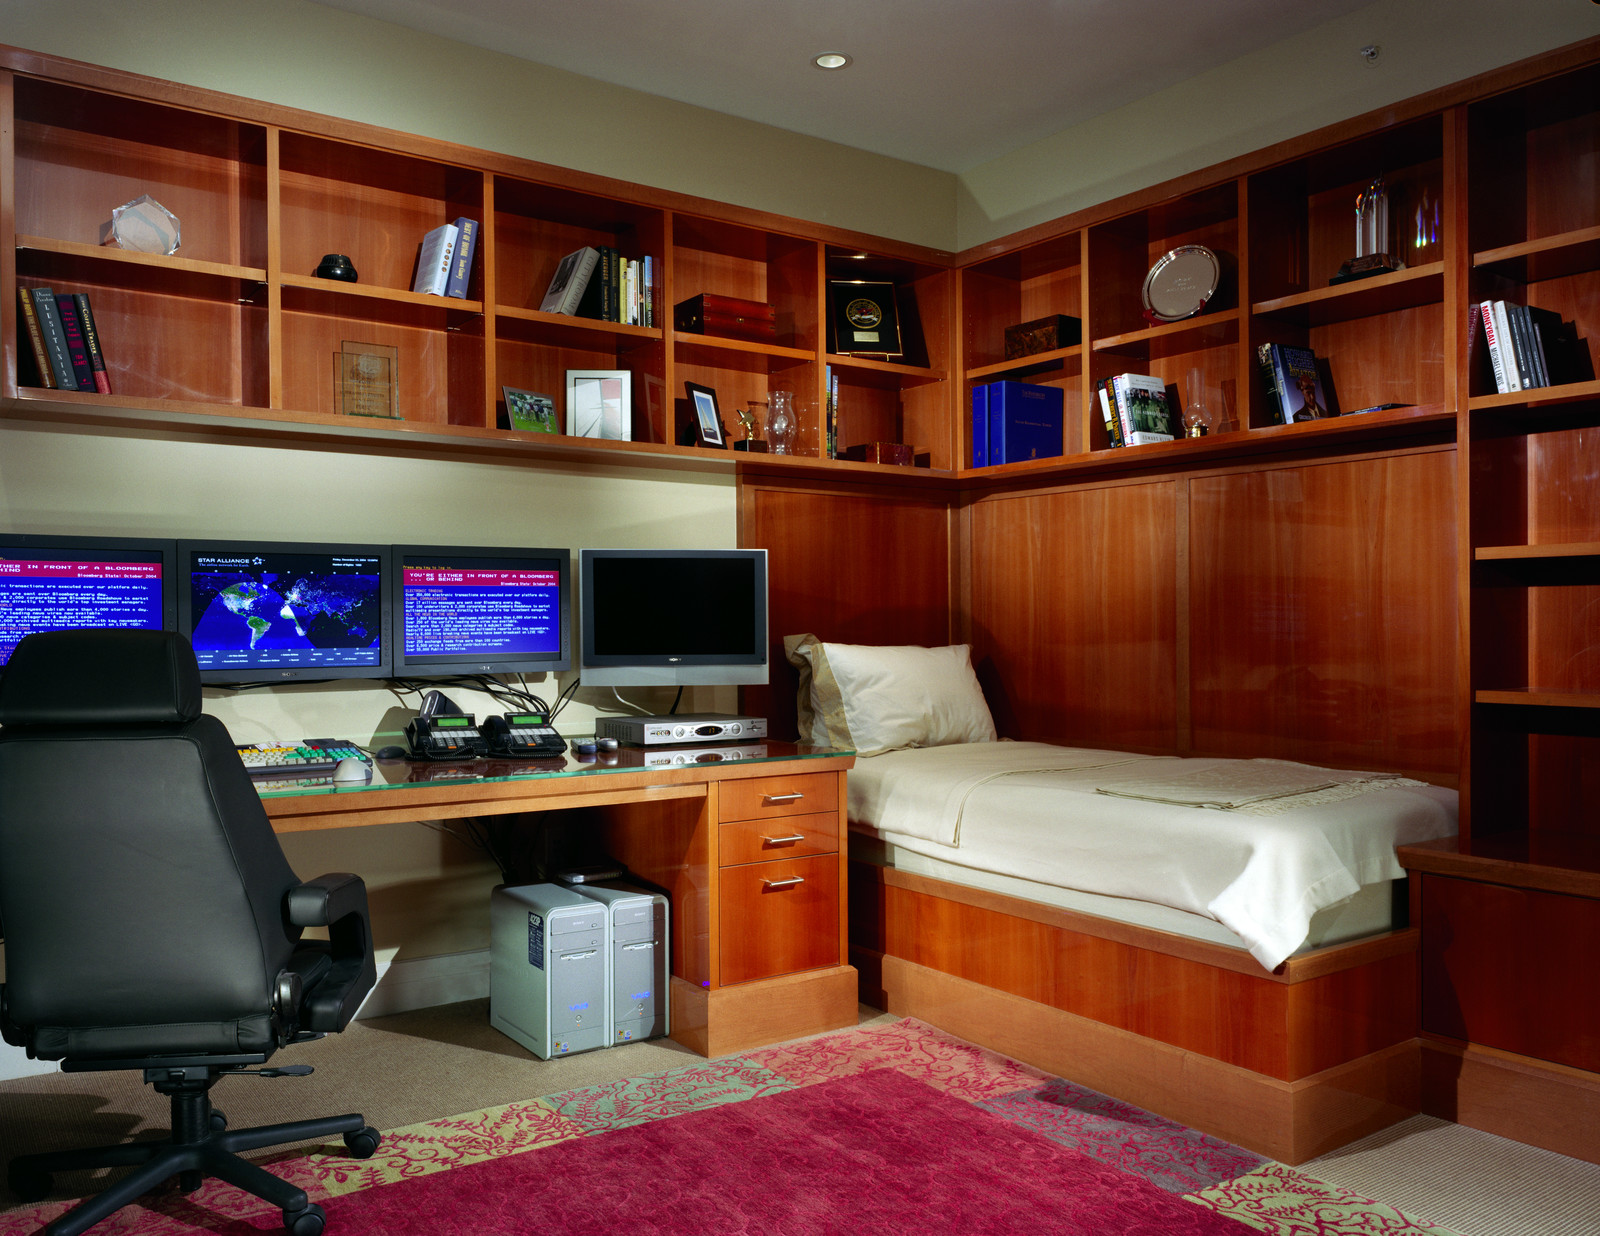 This custom built office/bedroom makes the best use of all the space. The woodwork makes the room!